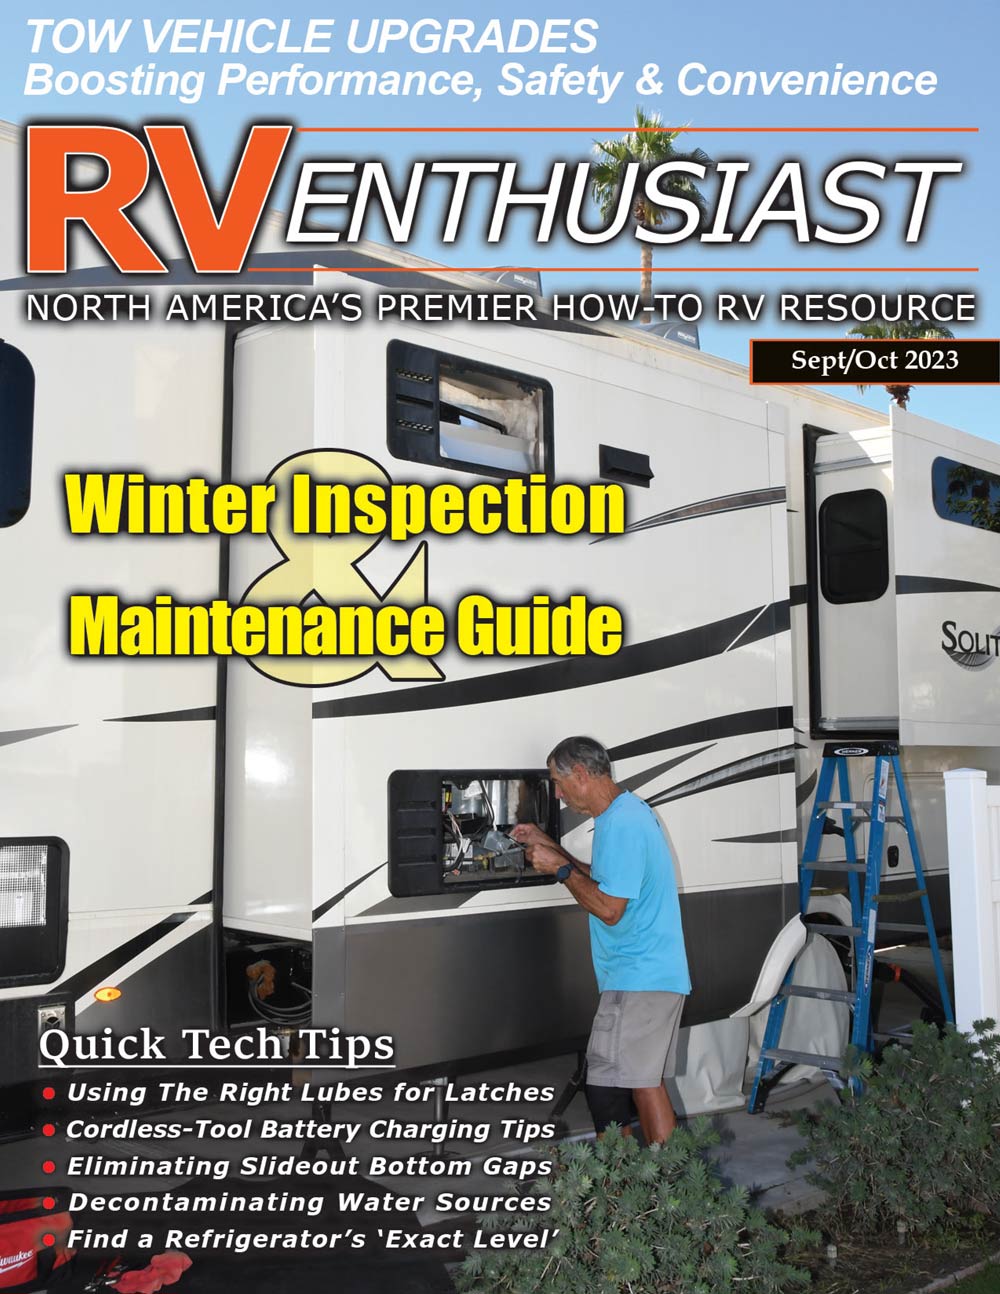 RV Enthusiast July/August 2023 cover